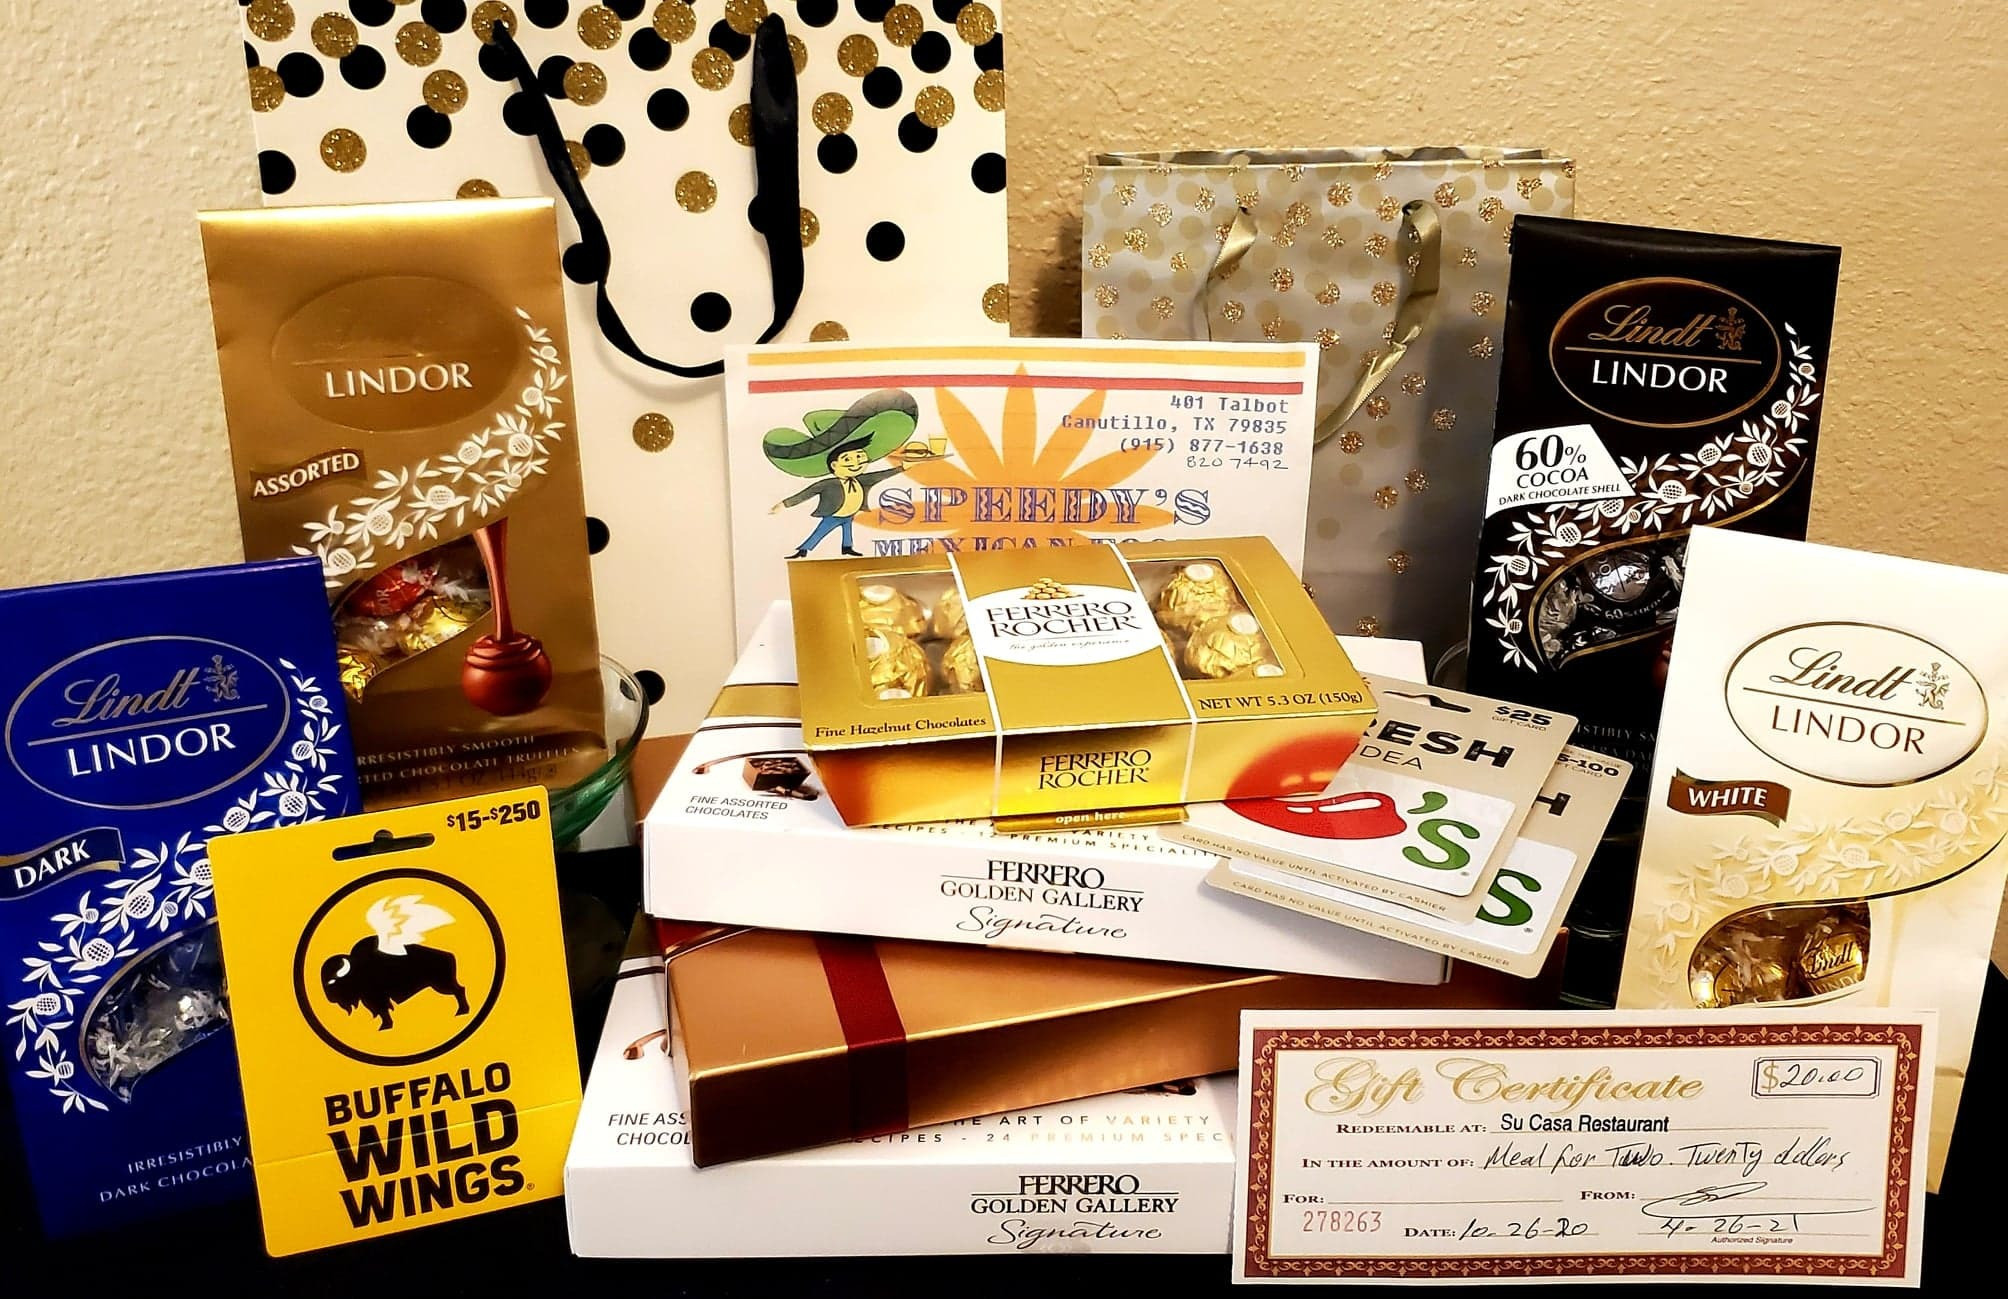 1 - $20 giftcard for Buffalo Wild Wings, 2 - giftcards for Chili's totaling $45, 1 - $20 gift certificate for Su Casa Restaurant, 1 gift certificate to Speedy's Mexican Food, 4 bags (20 oz) of Lindor chocolate, 1 box (7.3oz) of lindor truffles, 3 boxes of Ferrero chocolate.